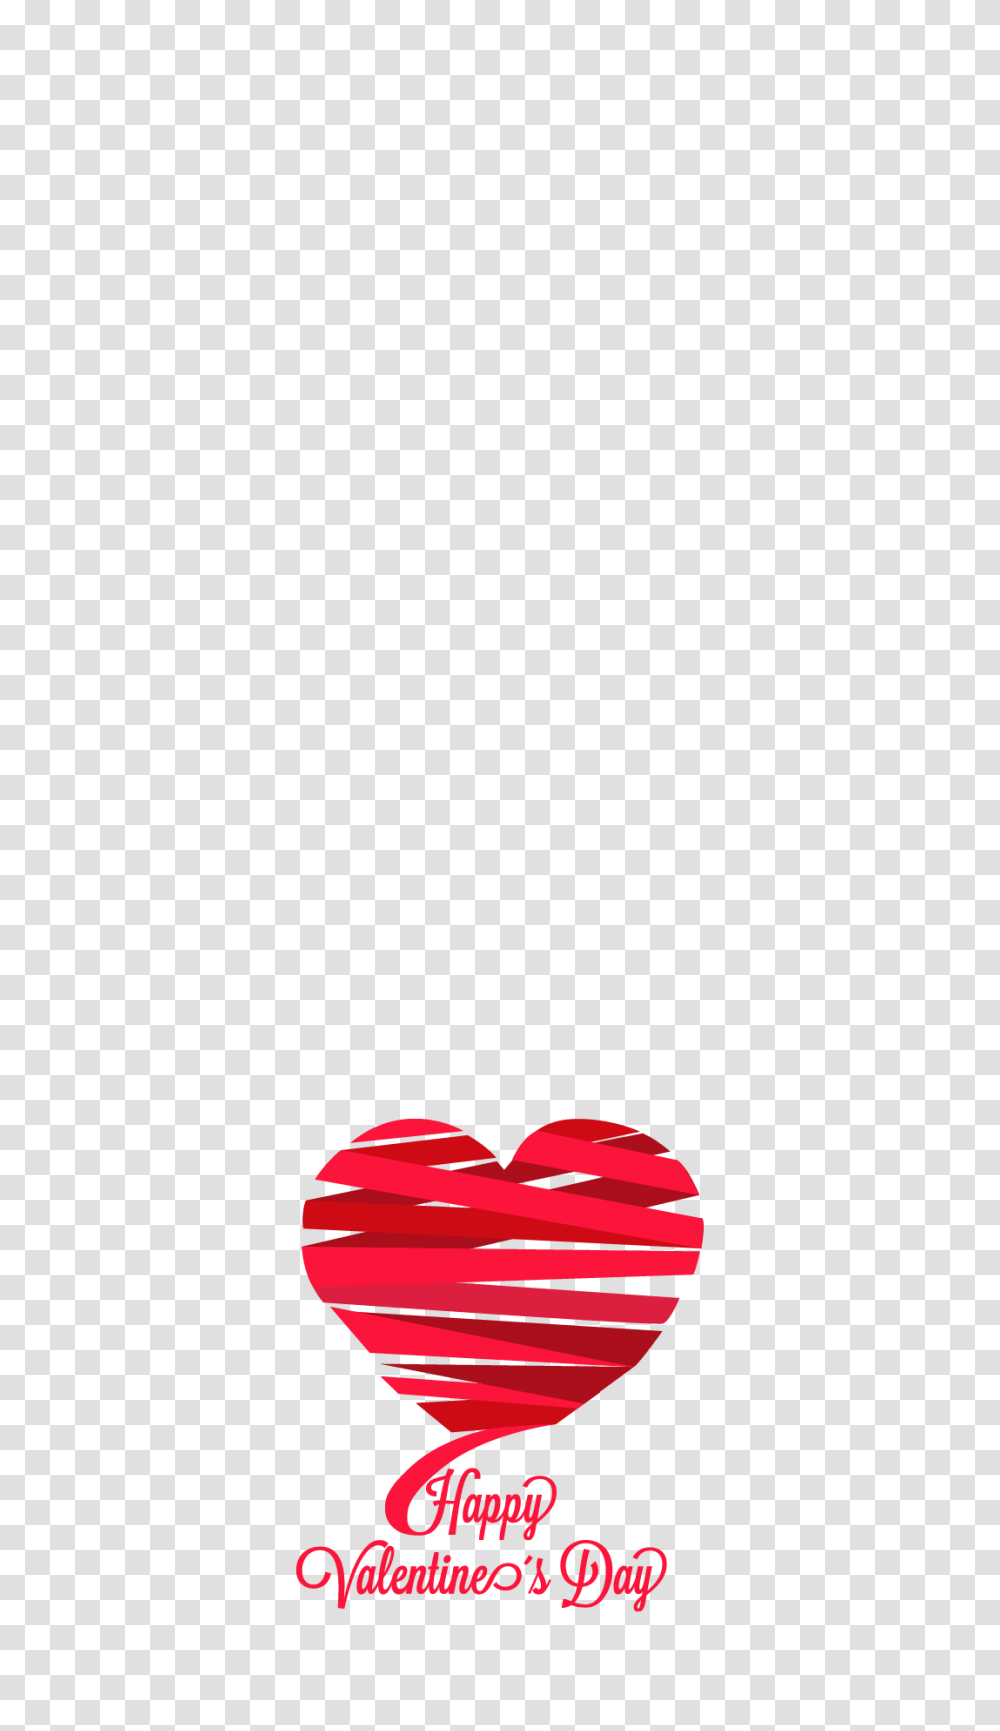 Happy Valentines Day Snapchat Filter Geofilter Maker On Filterpop, Apparel, White Transparent Png